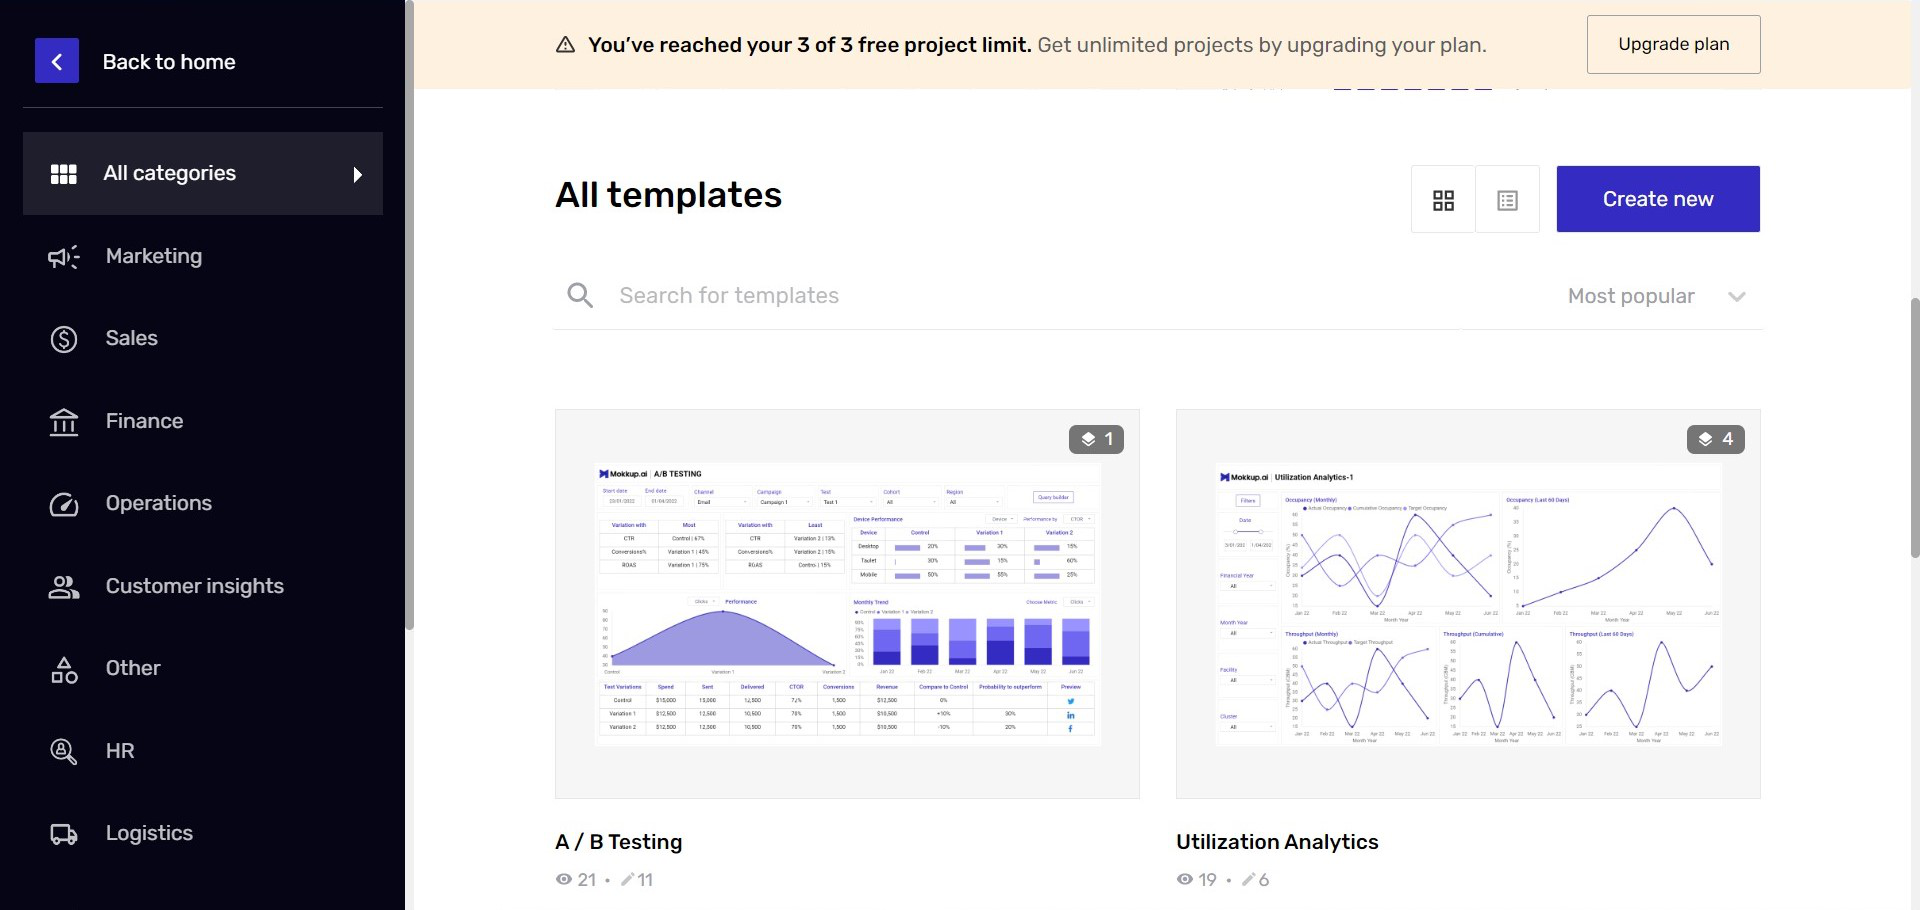 Discover multiple templates with industry-standard metrics that you can tailor to your business needs.